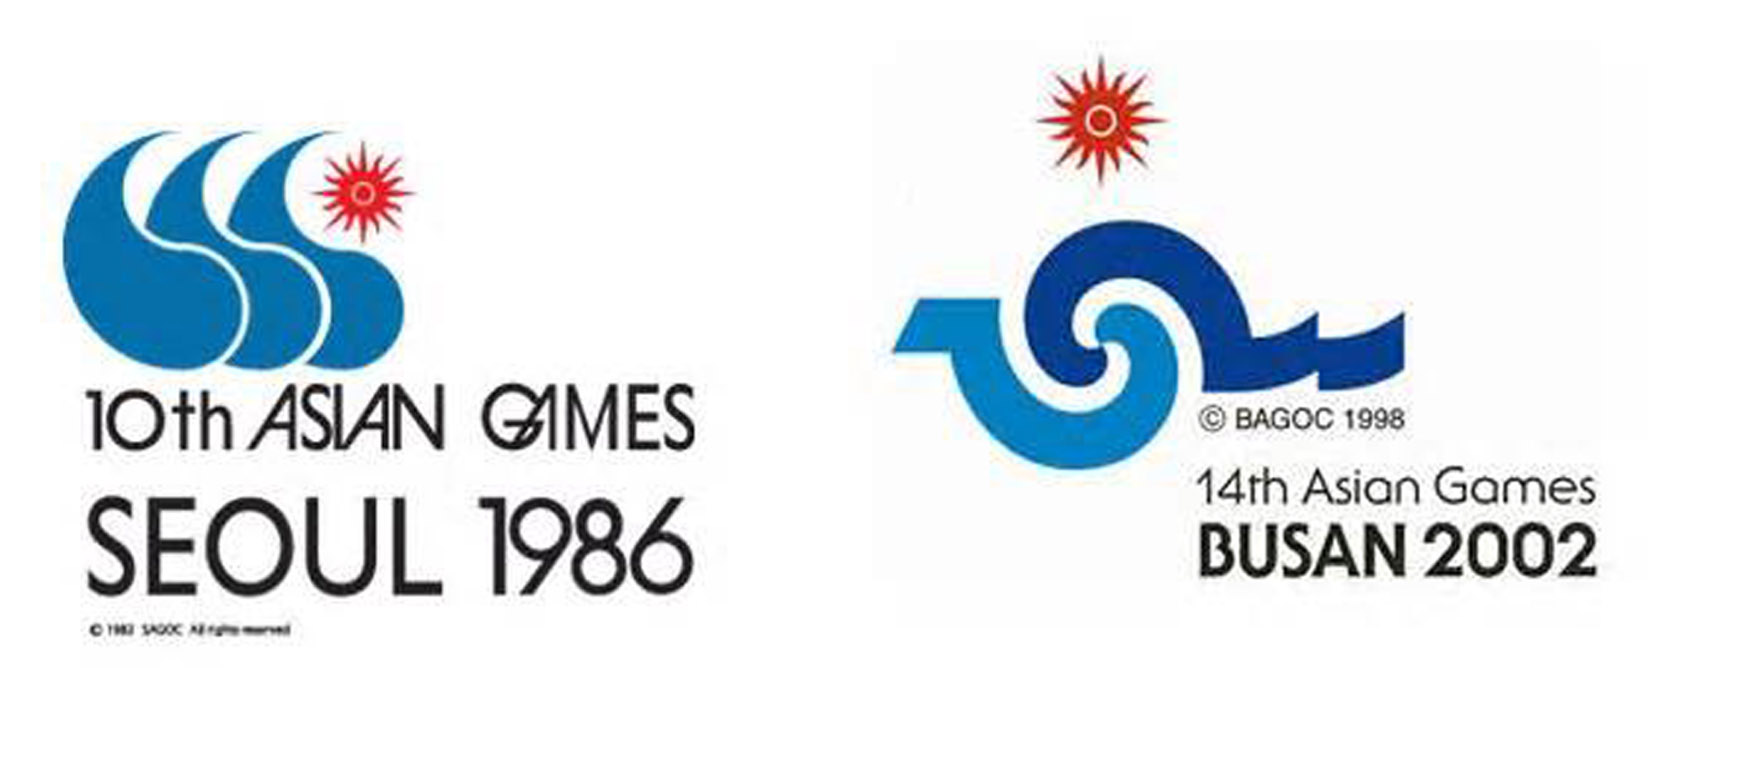 First Asian Games 83